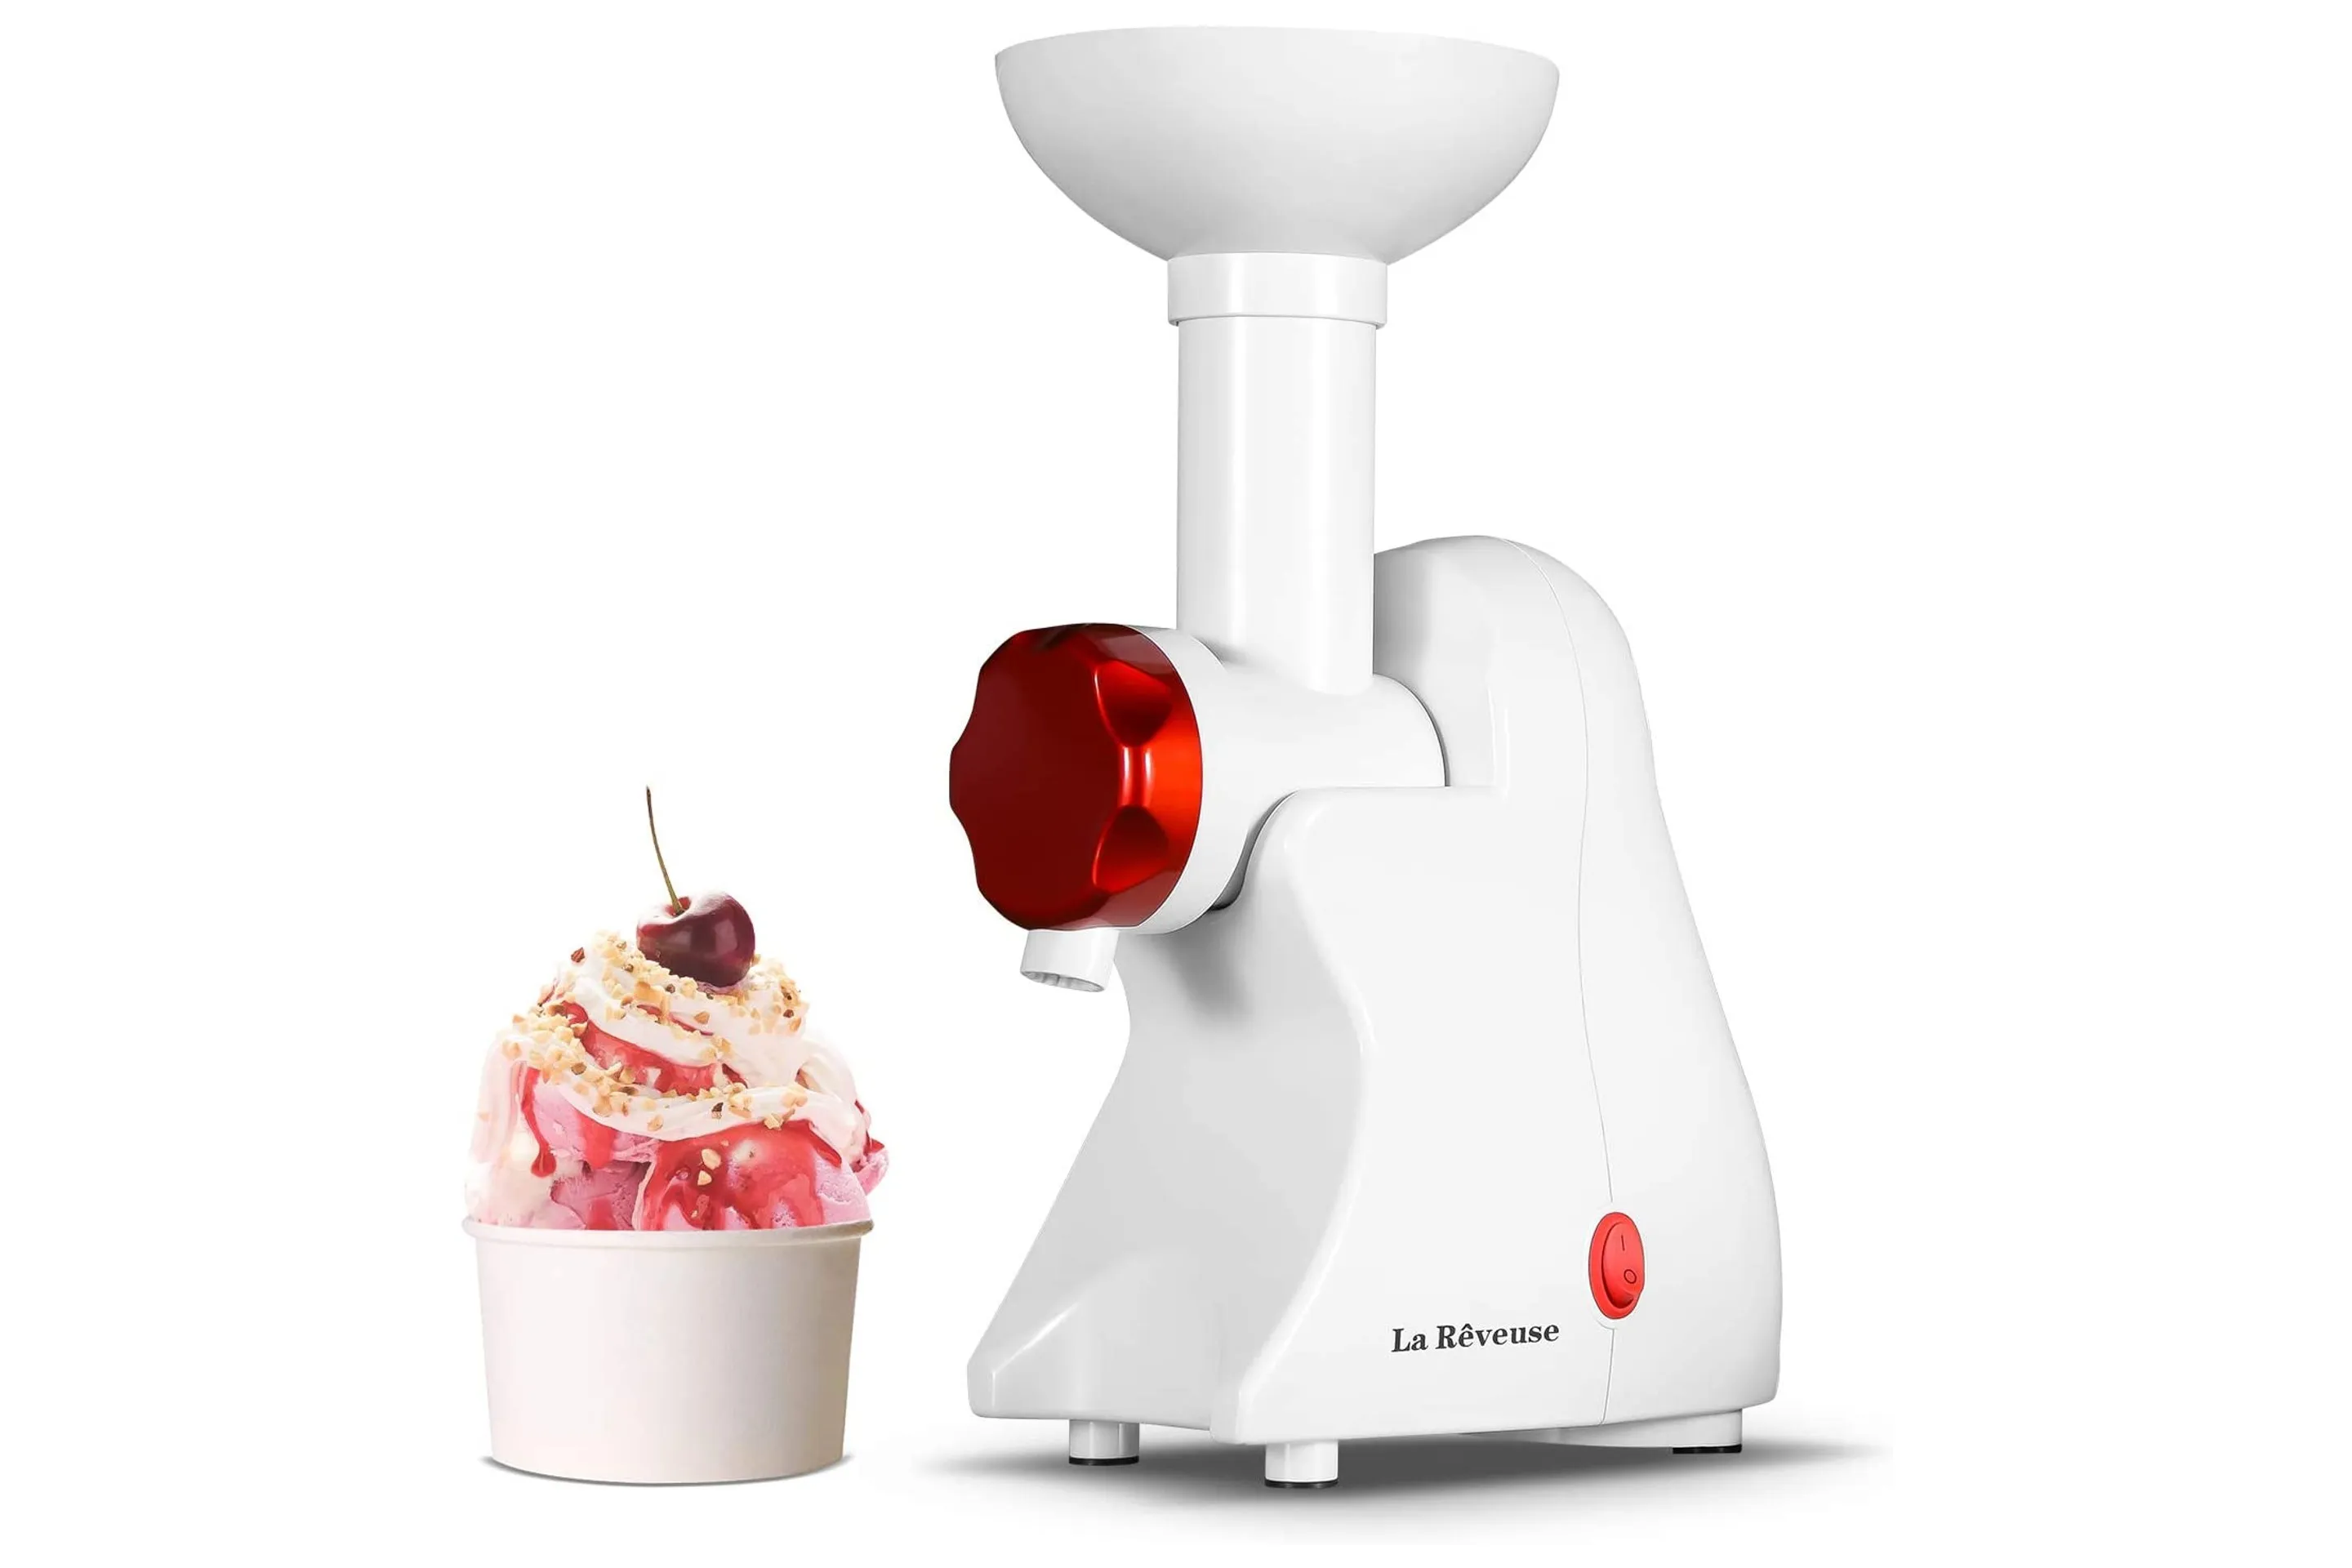 Ice Cream Makers, Fully Automatic Mini Fruit Soft Serve Ice Cream Machine  Simple One Push Operation, Great for Making Healthy Soft Serve Sherbet